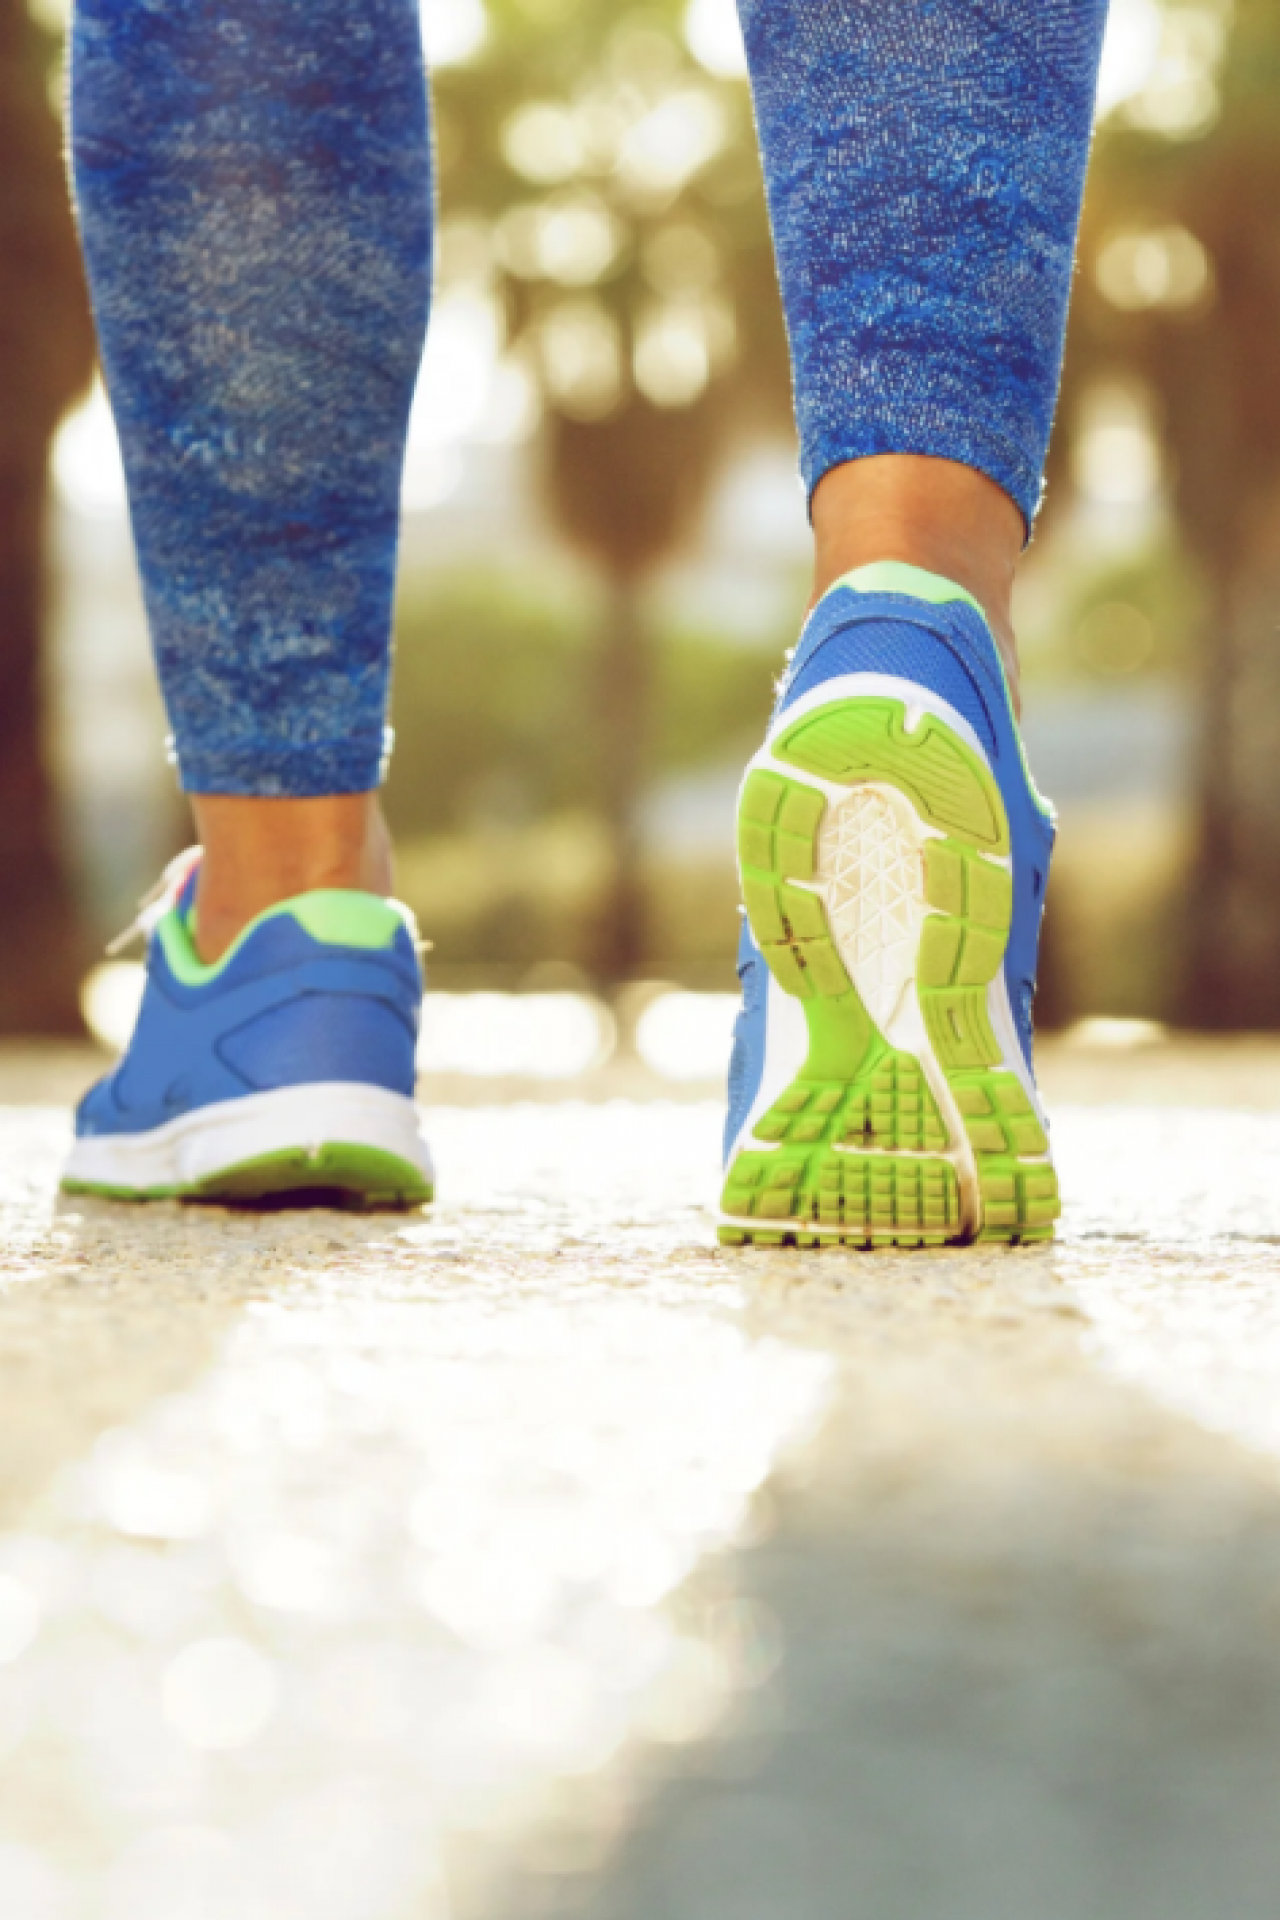 14 Ways to Make Your Daily Walk Feel More Like a Walking Workout